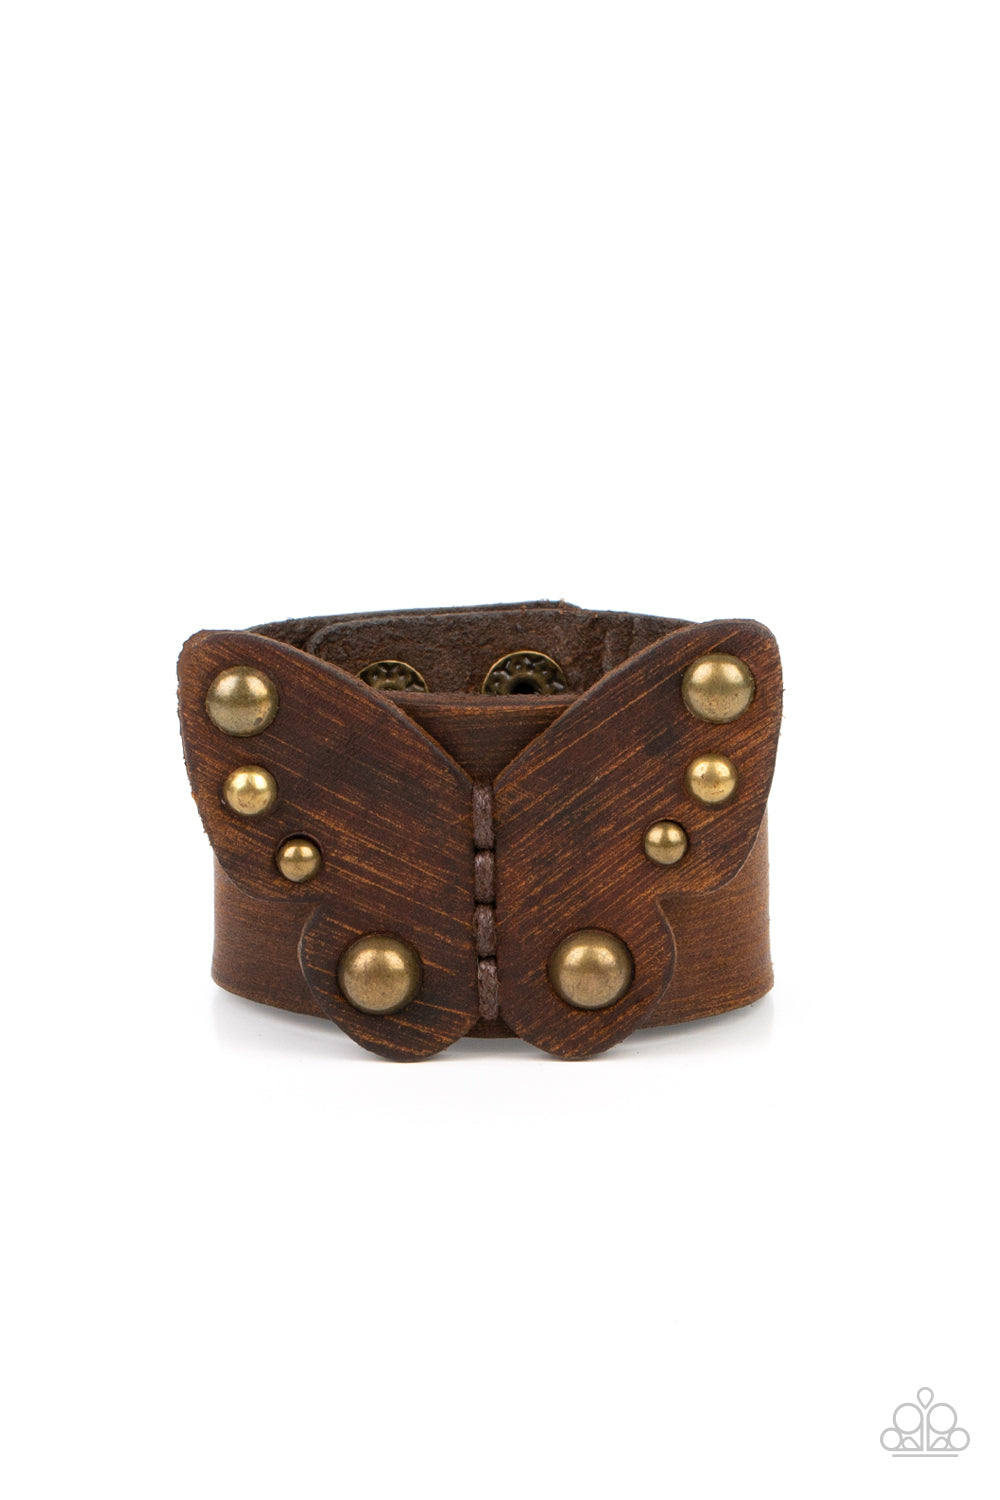 Paparazzi Accessories - Butterfly Farm - Brass Leather Bracelets dotted with antiqued brass studs, a distressed leather butterfly is studded in place across the center of a distressed brown leather band for a rustic flair. Features an adjustable snap closure.  Sold as one individual bracelet.